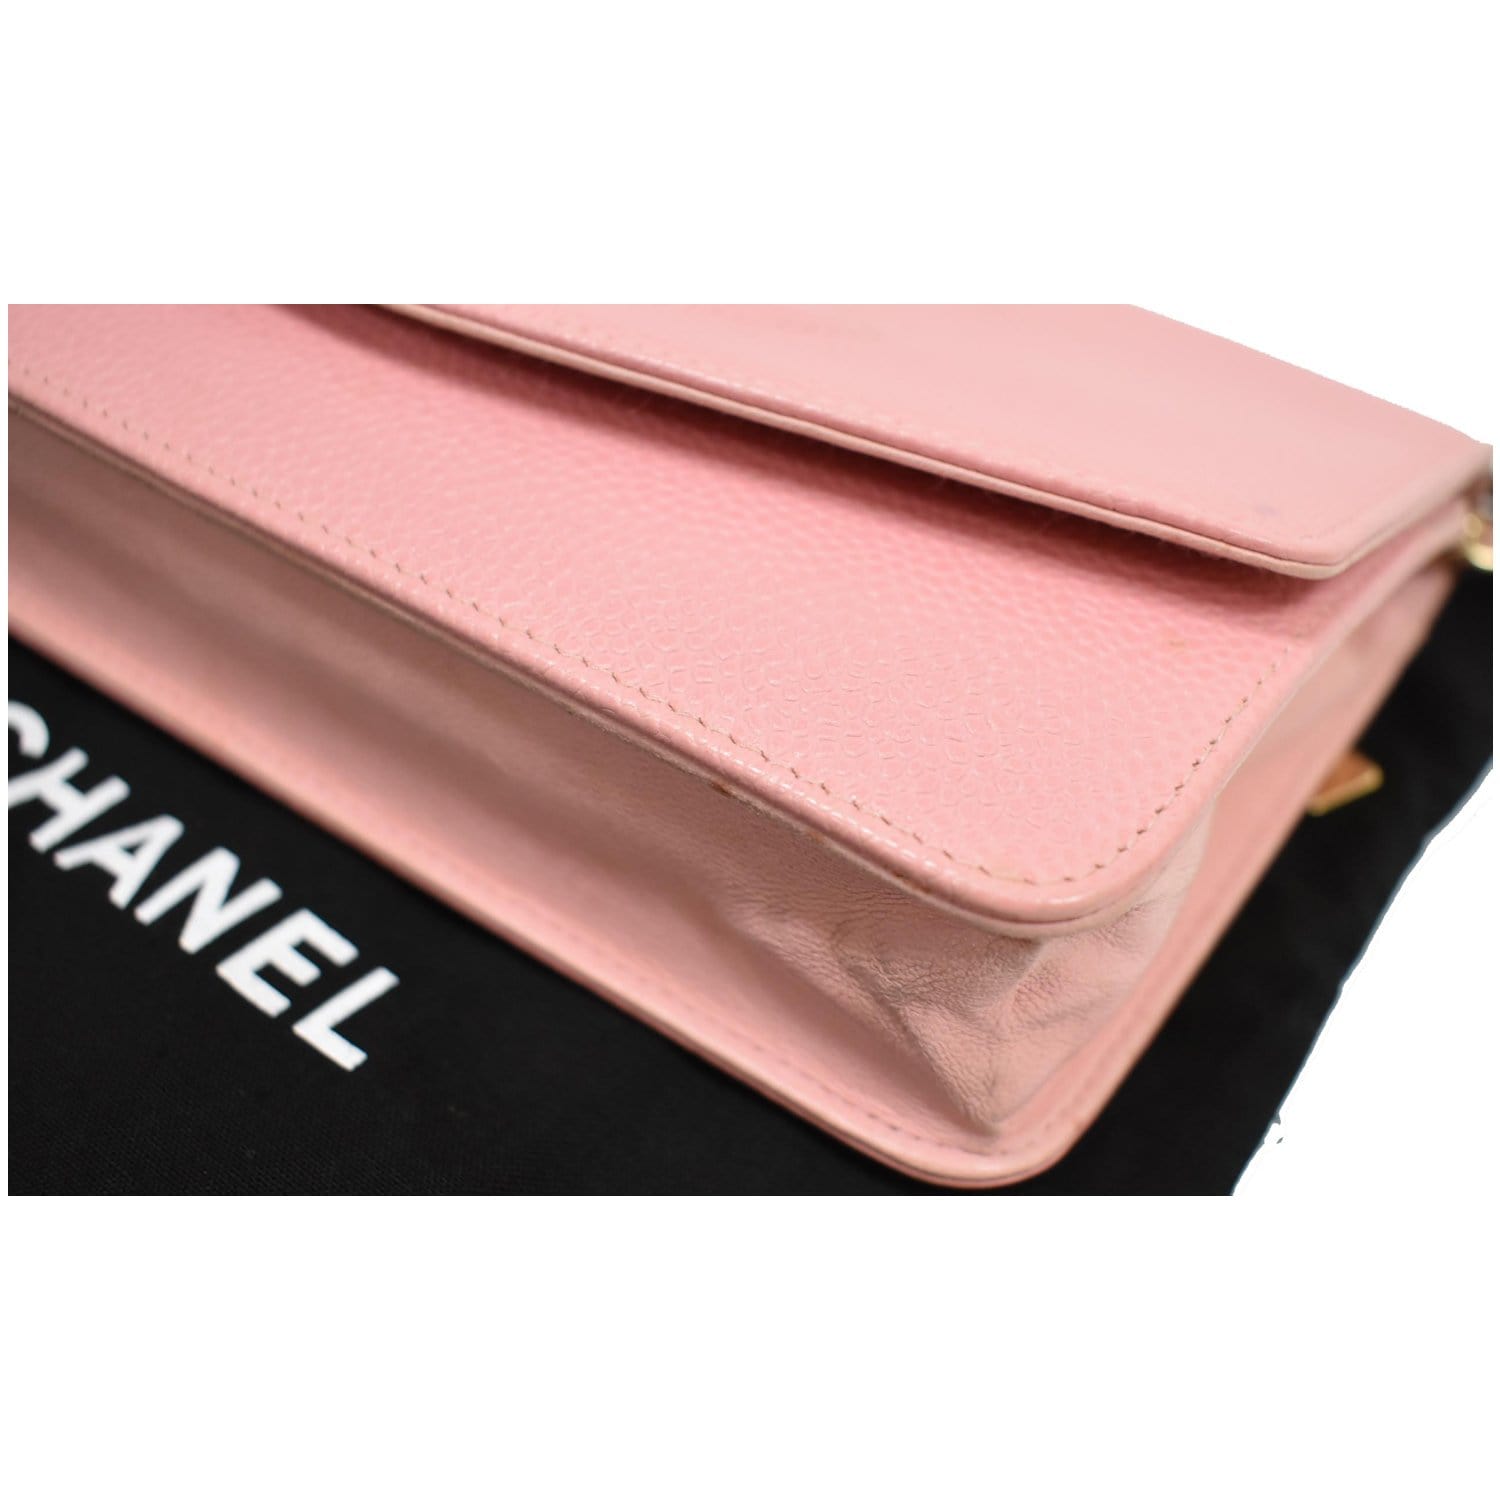 Chanel Classic Trifold Pink Flap Wallet Quilted Lambskin